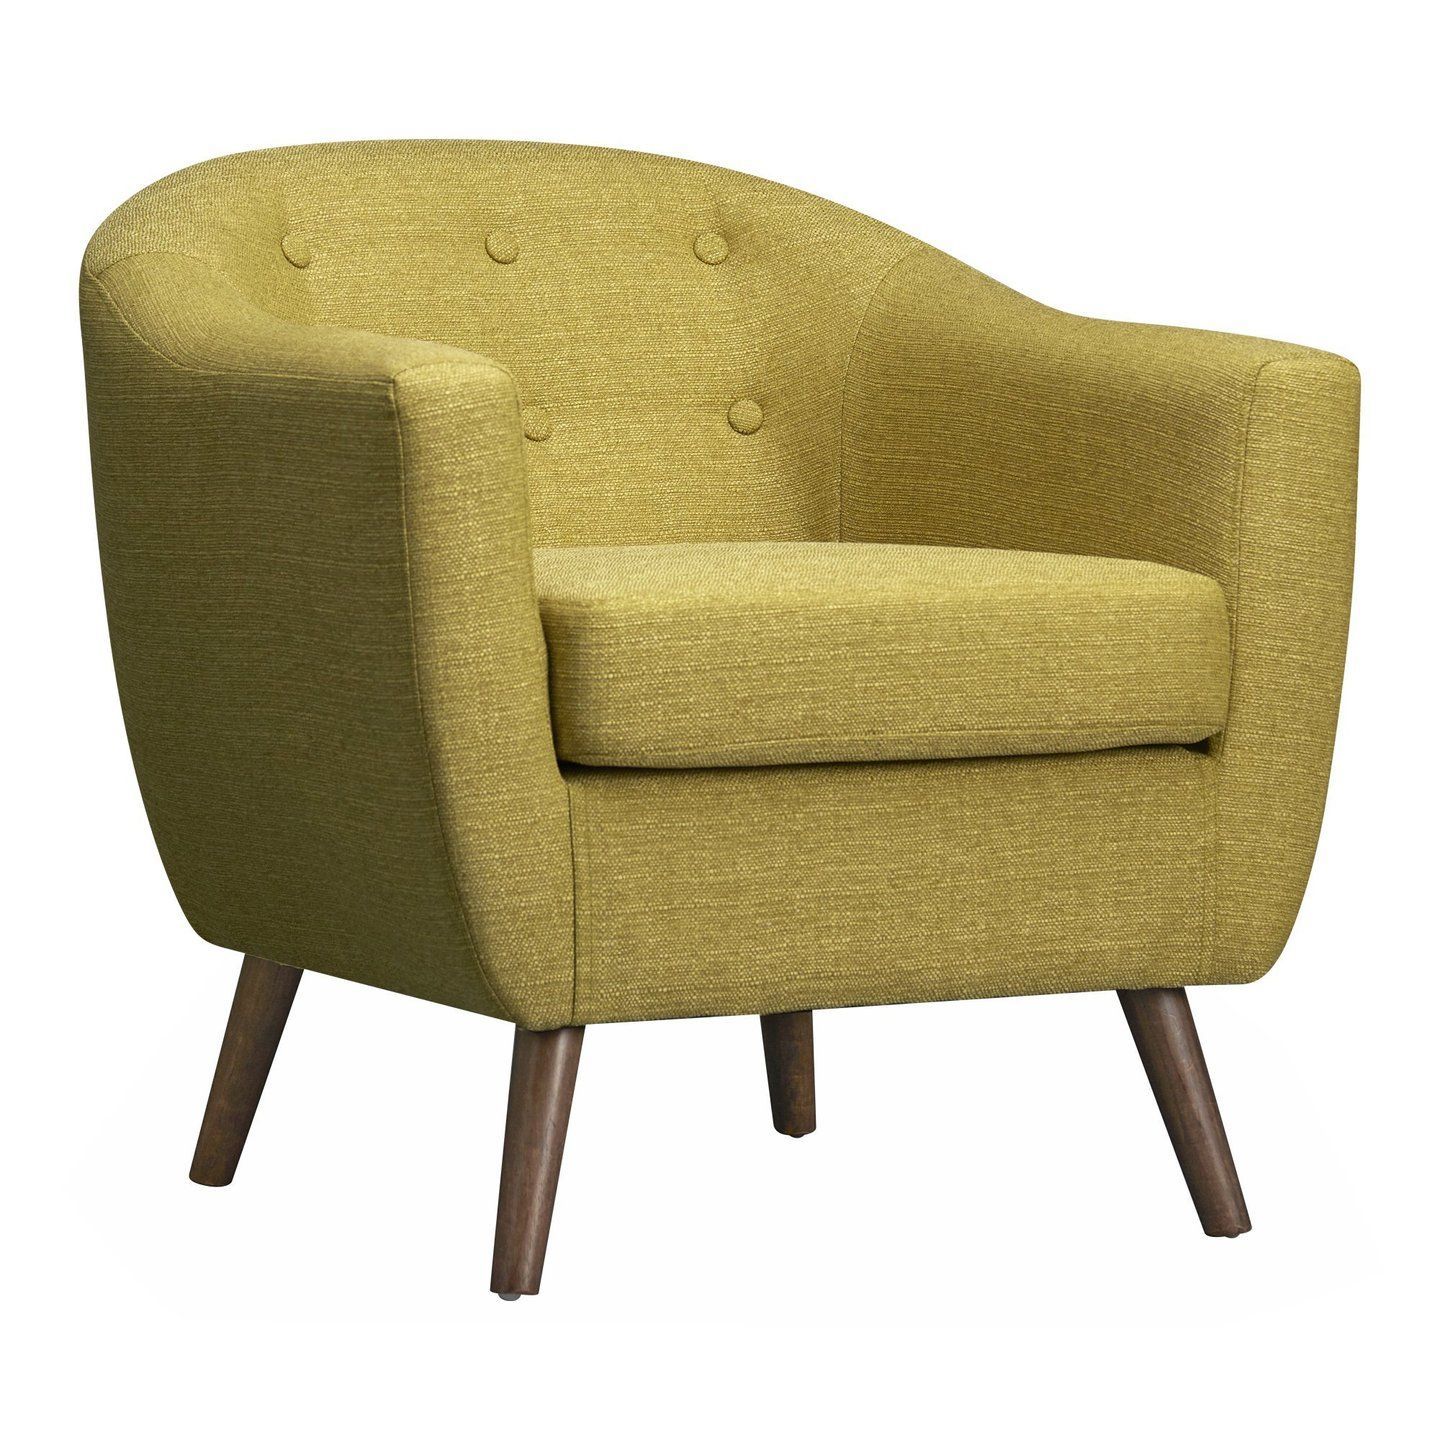 Layna Mid Century Accent Chair In 2019 | New | Chair Throughout Poly And Bark Teal Rocking Chairs Lounge Chairs (View 16 of 20)